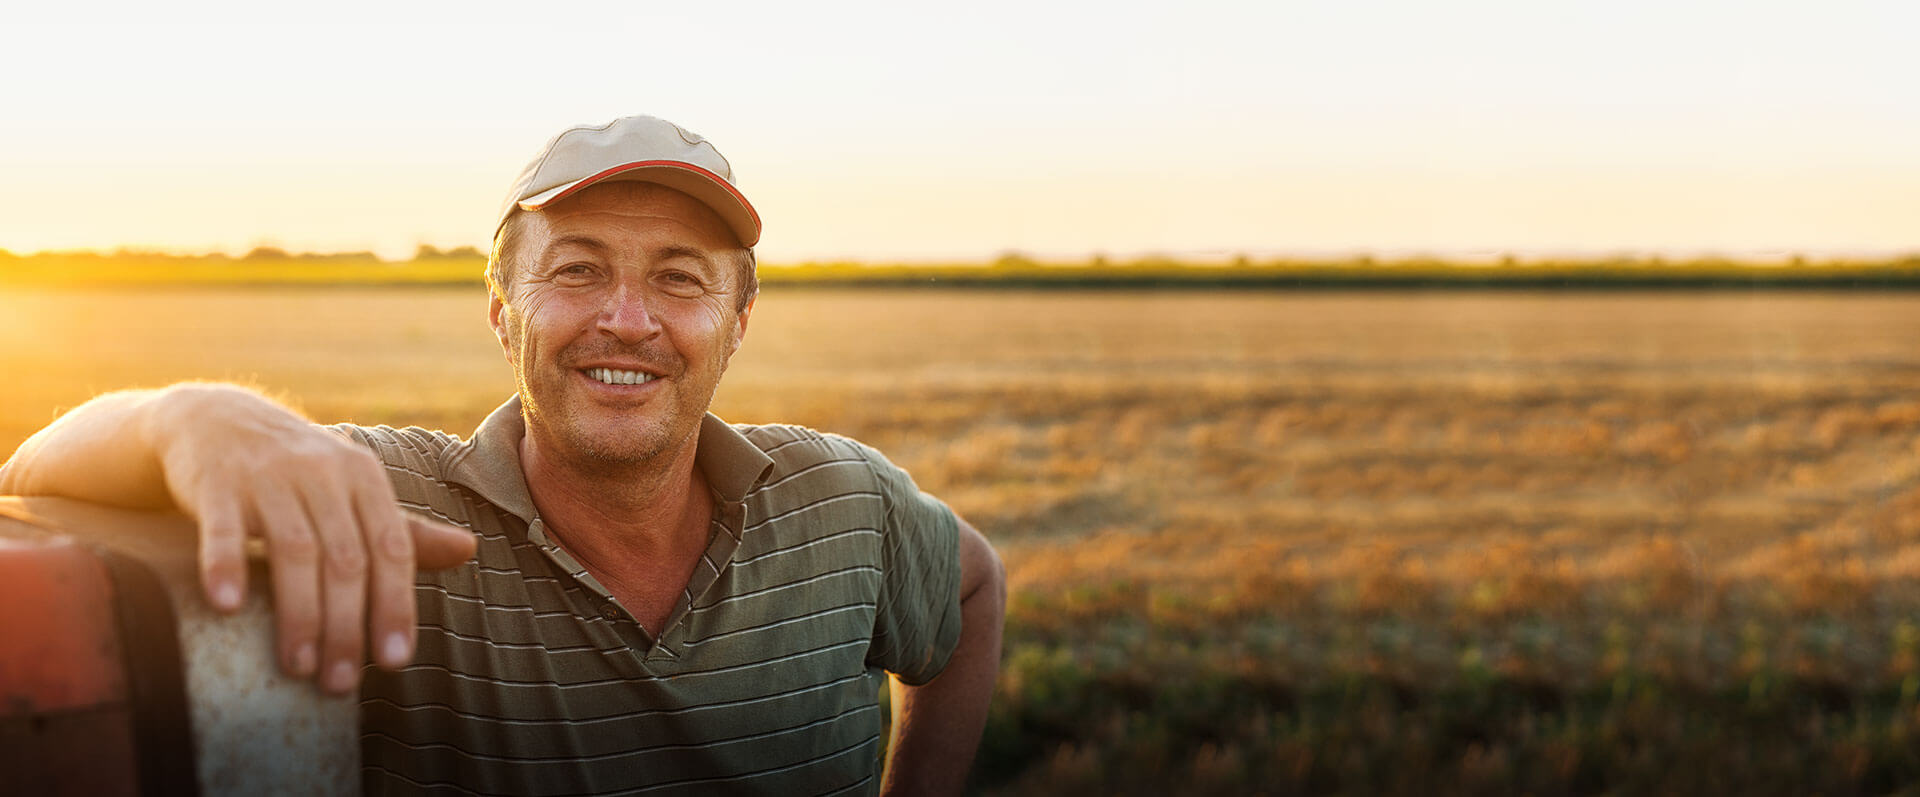 Image of Farmer Leaning on a truck in a field at sunset